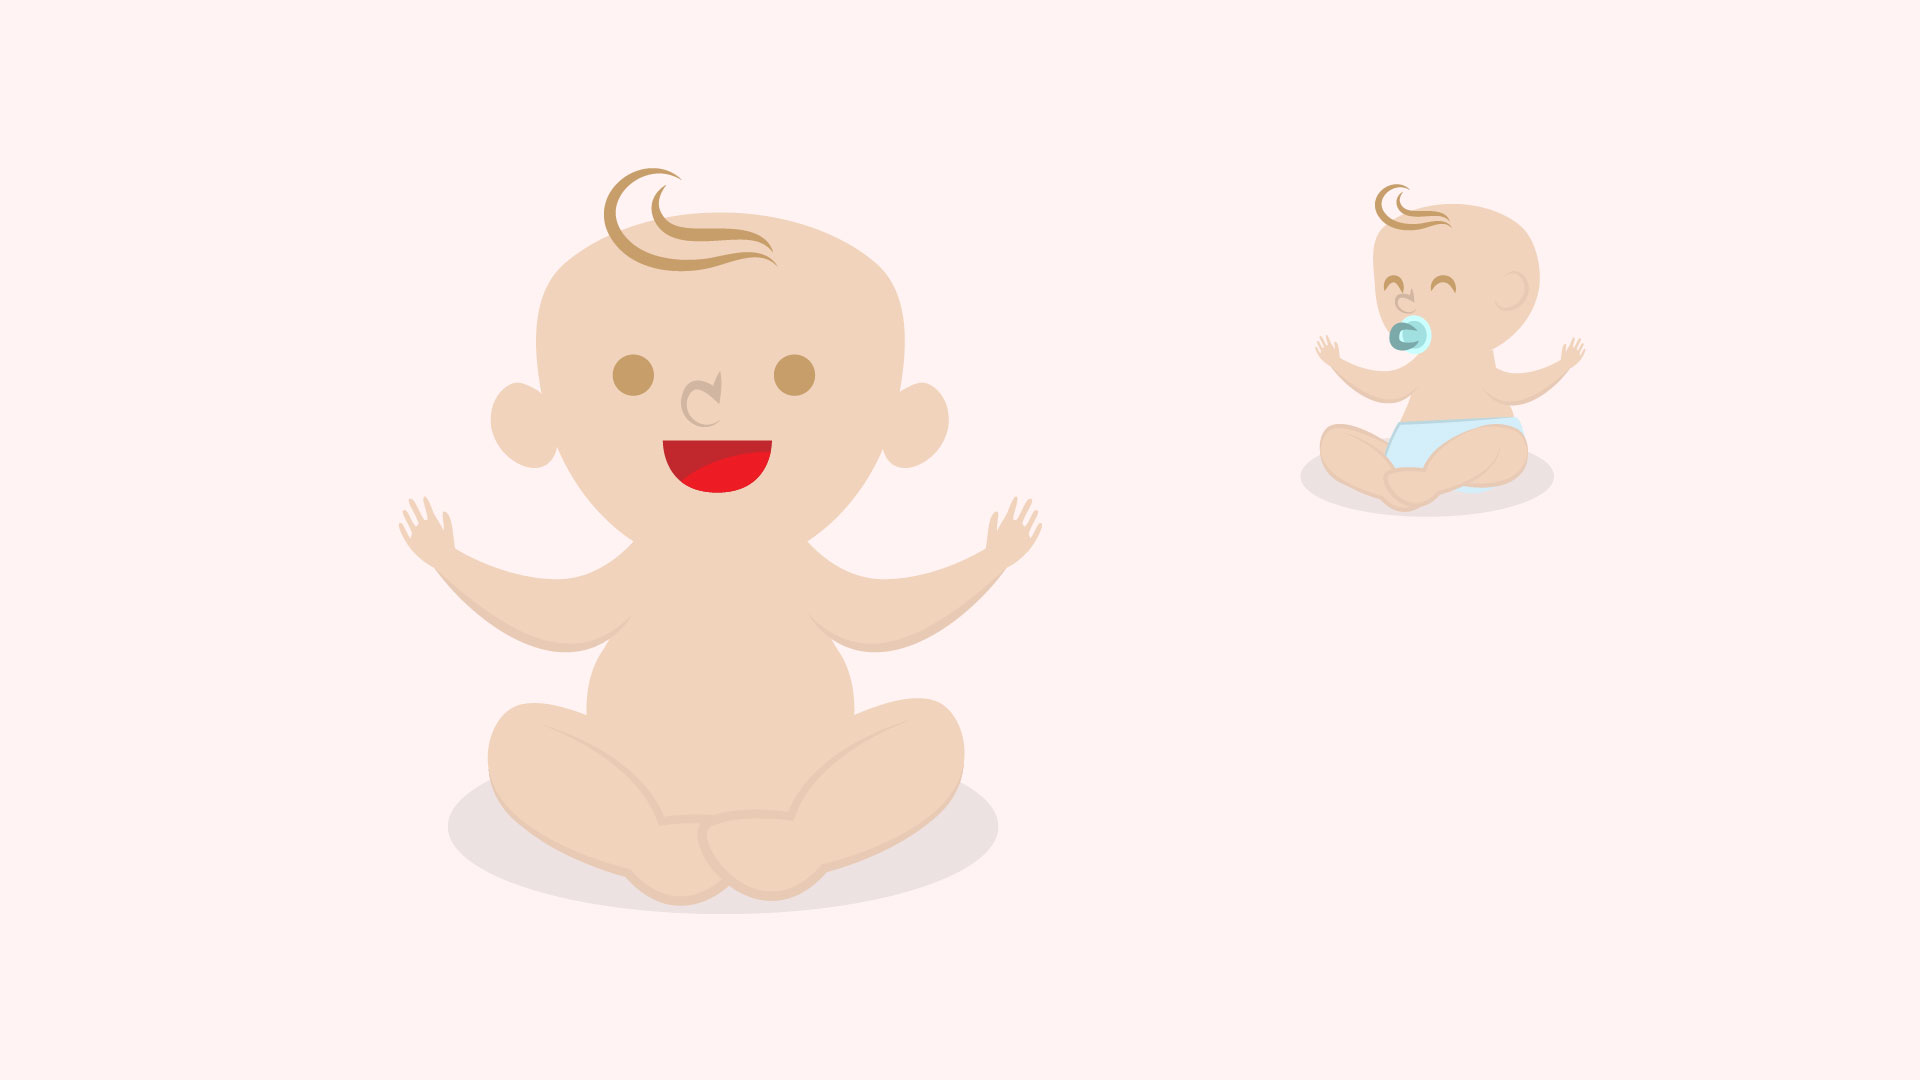 Character design for a 2D animated baby